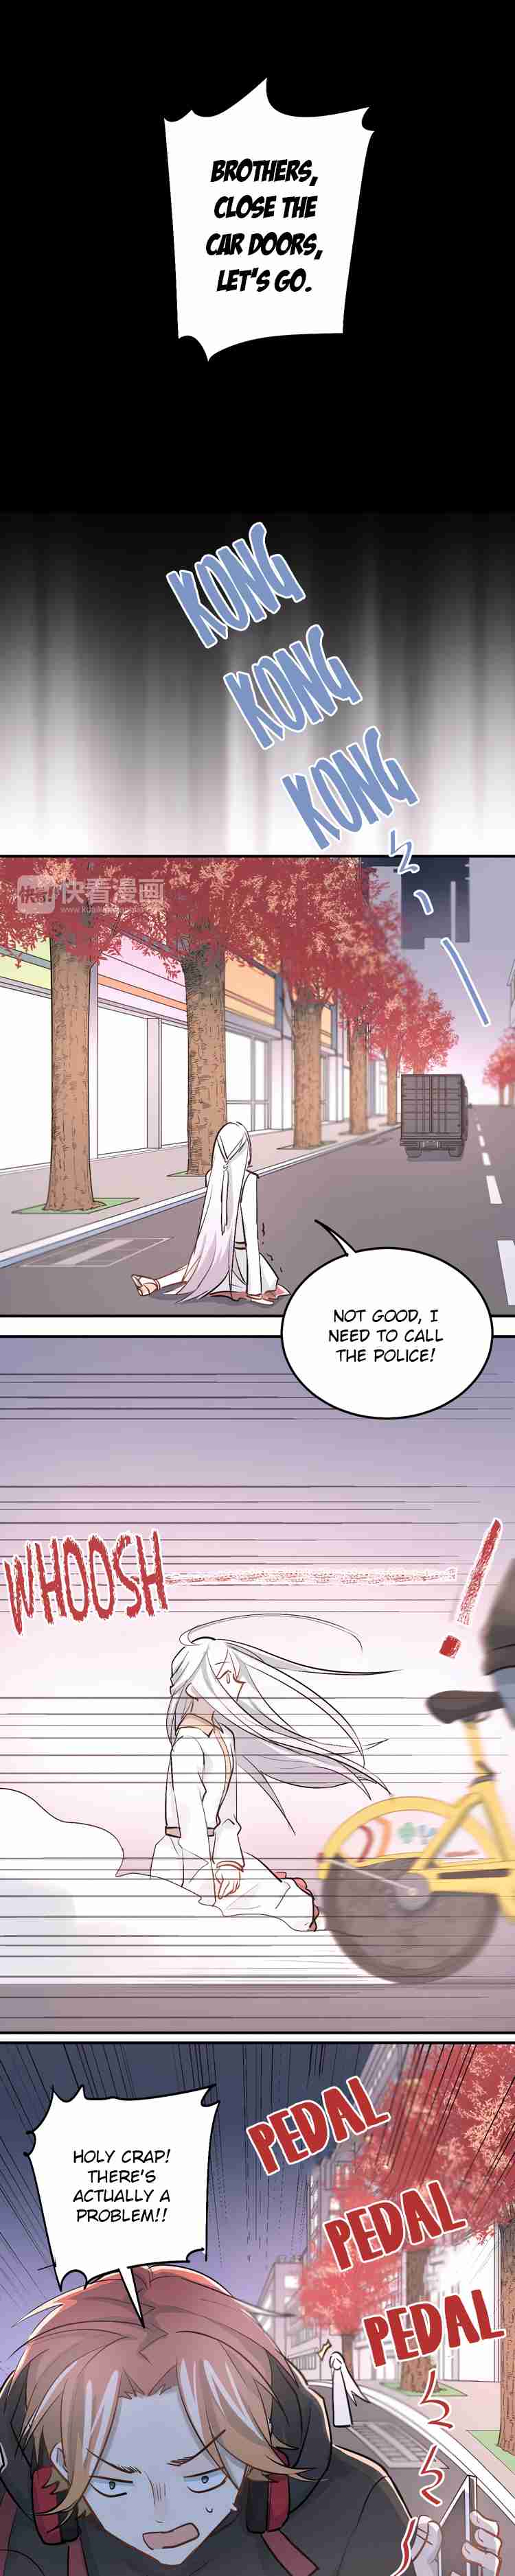 The Tyrant Falls In Love Ch. 23